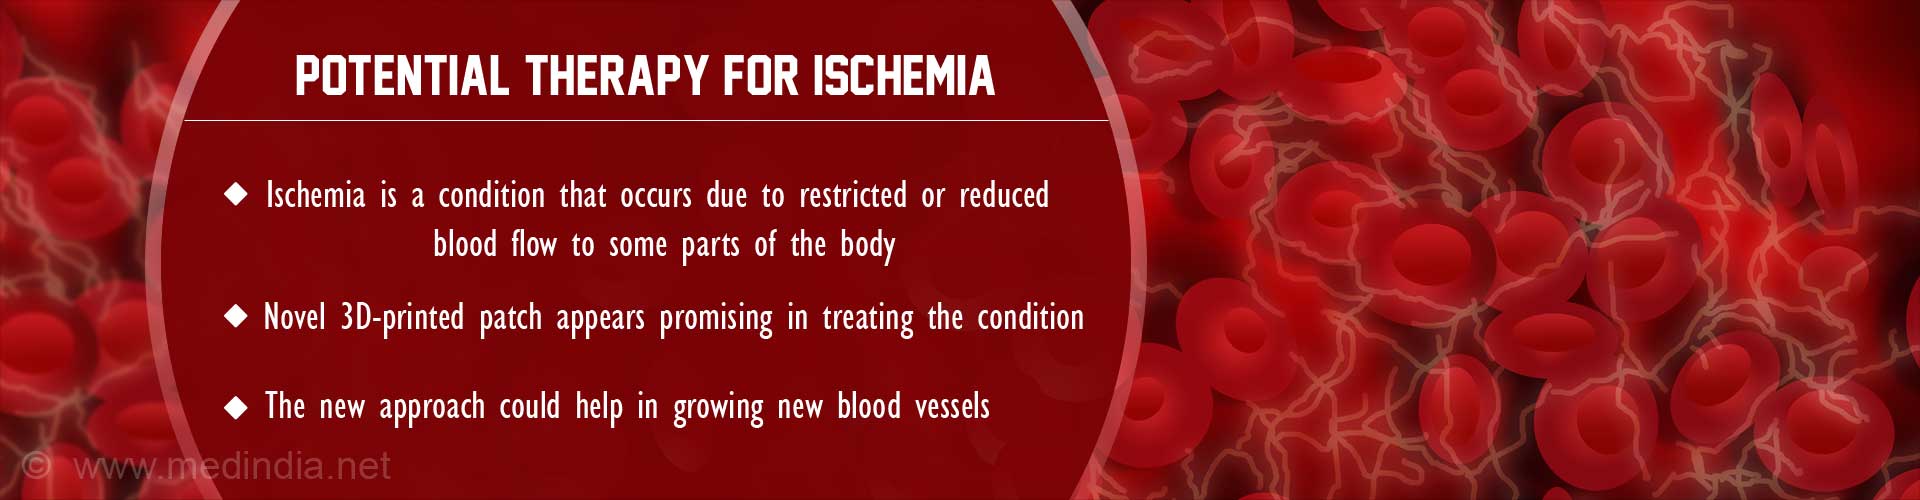 Potential therapy for ischemia
- Ischemia is a condition that occurs due to restricted or reduced blood flow to some parts of the body
- Novel 3D-printed patch appears promising in treating the condition
- The new approach could help in growing new blood vessels